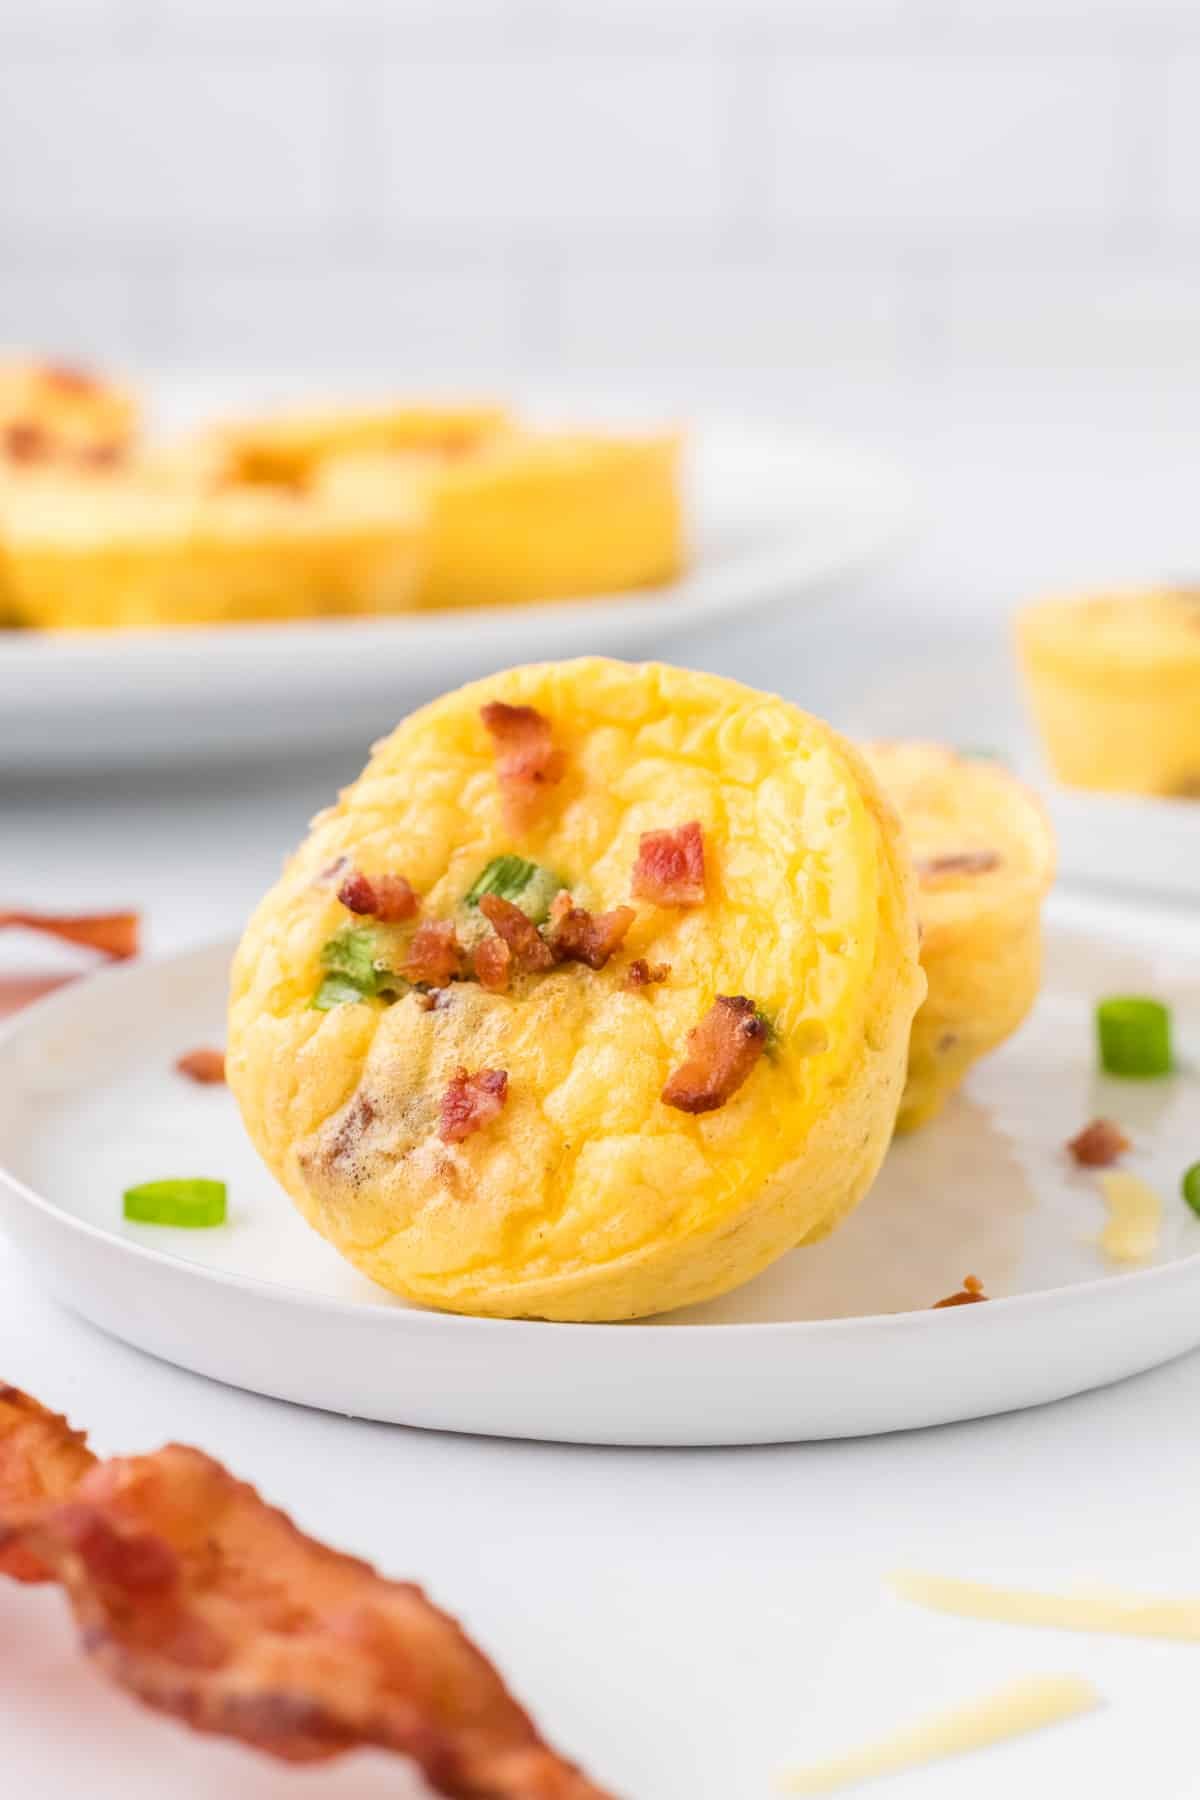 Two egg bites on a plate garnished with cooked bacon and green onion.